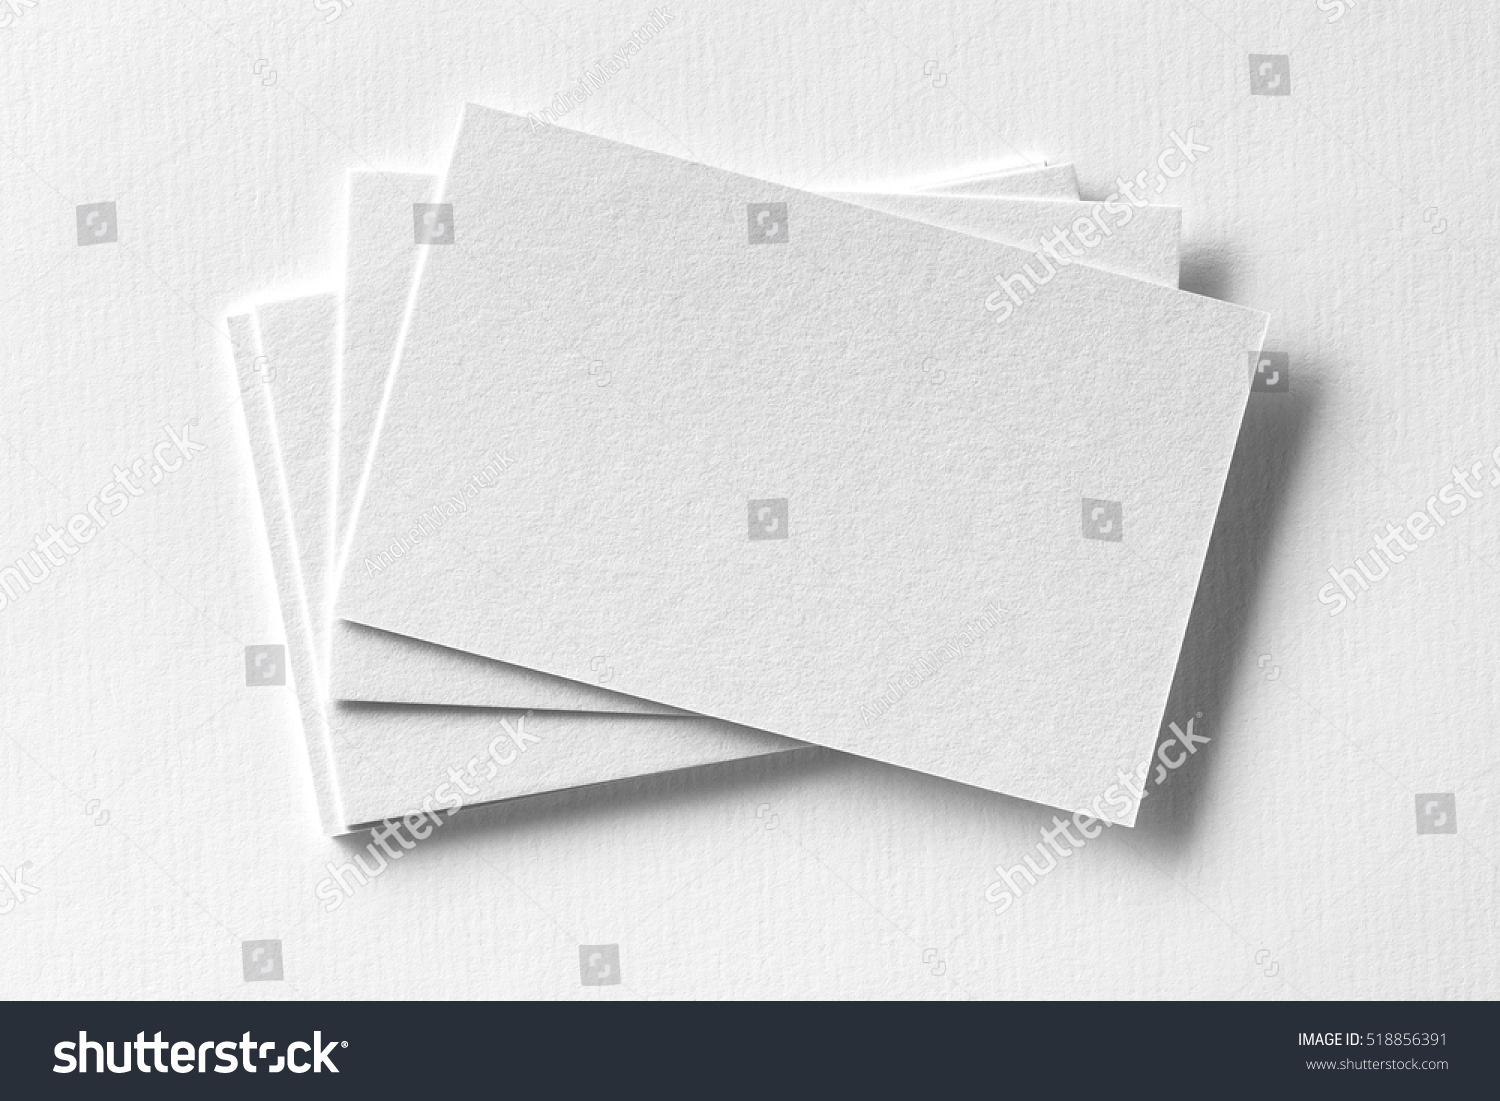 Download Mockup Business Cards Fan Stack White Stock Photo 518856391 - Shutterstock